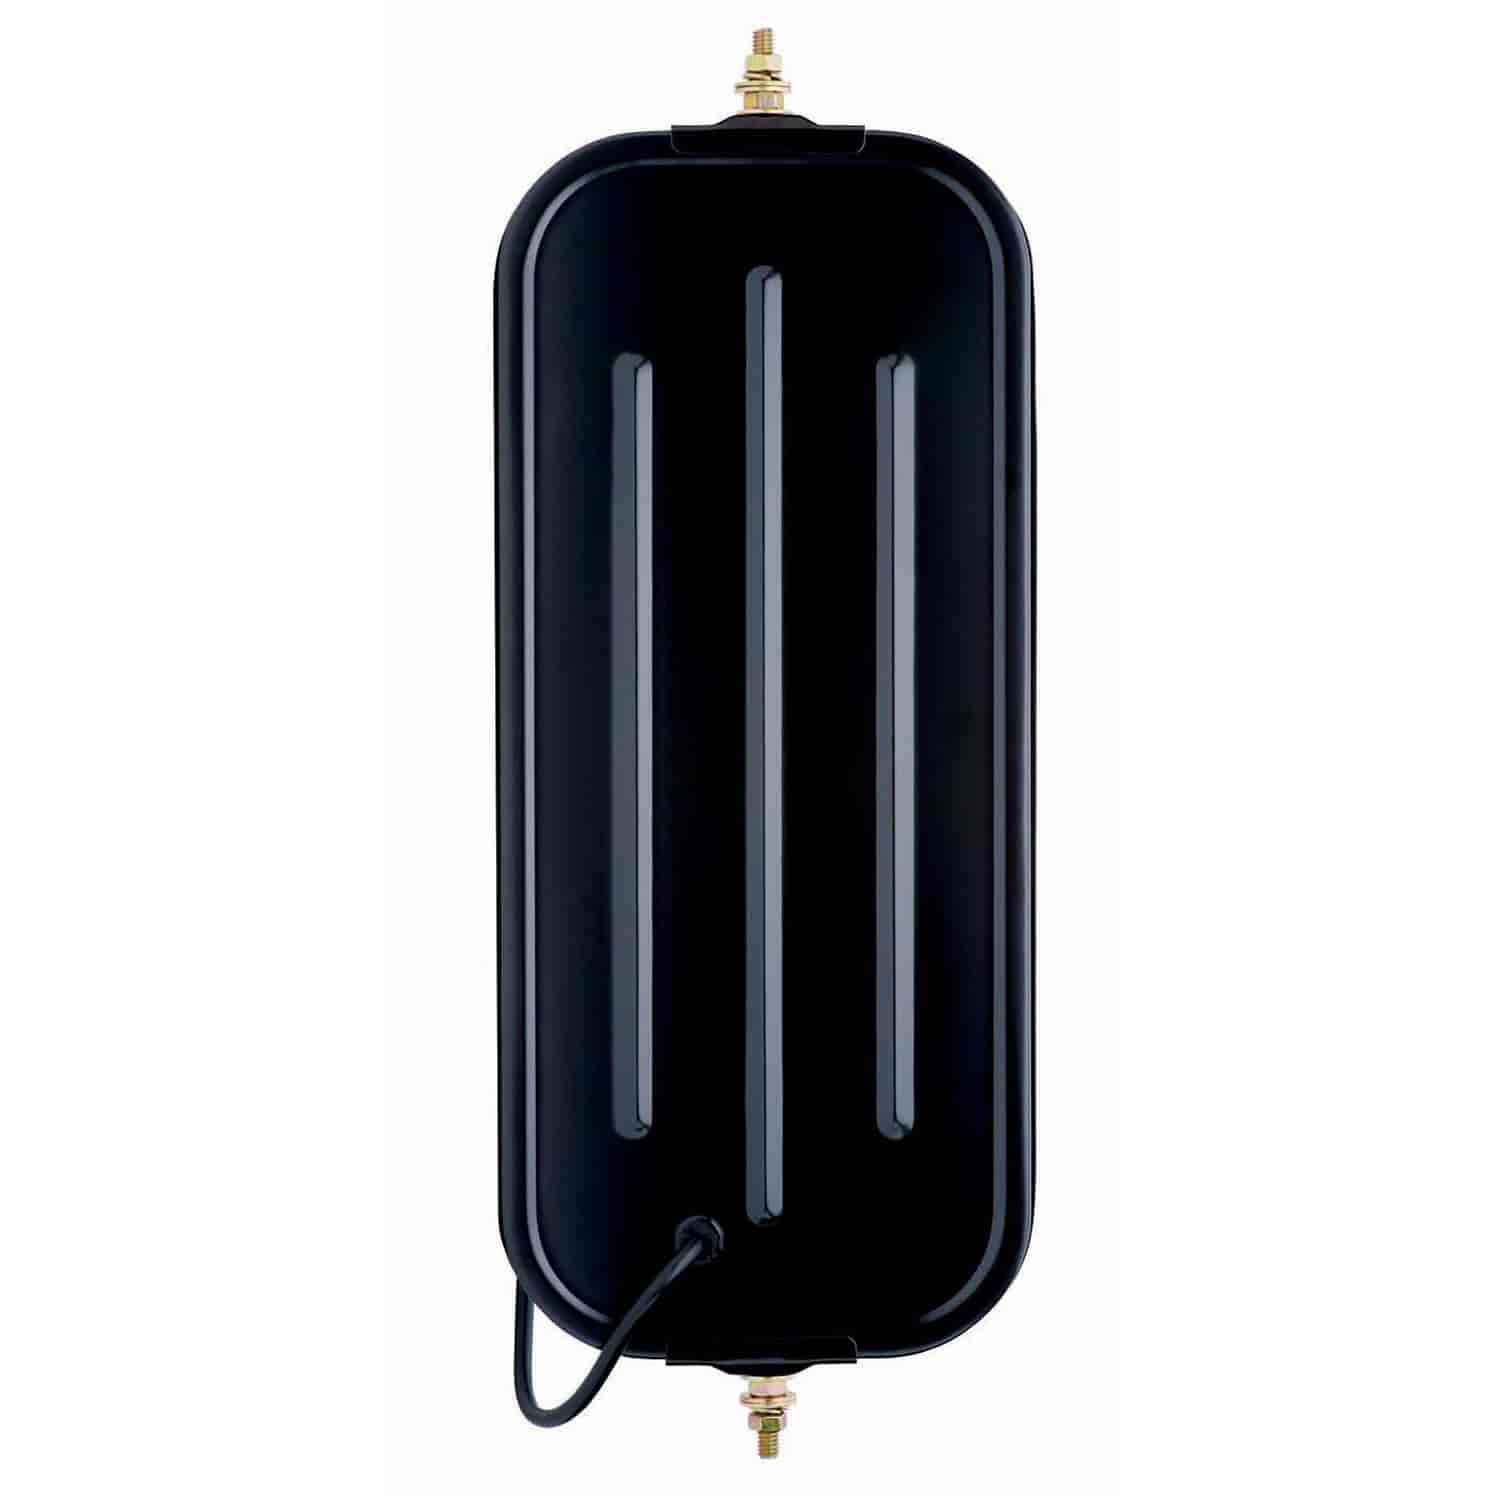 Replacement West Coast Mirror head HD ribbed back 7x16 blk heated Easy bolt on installation Black Finish Heated.